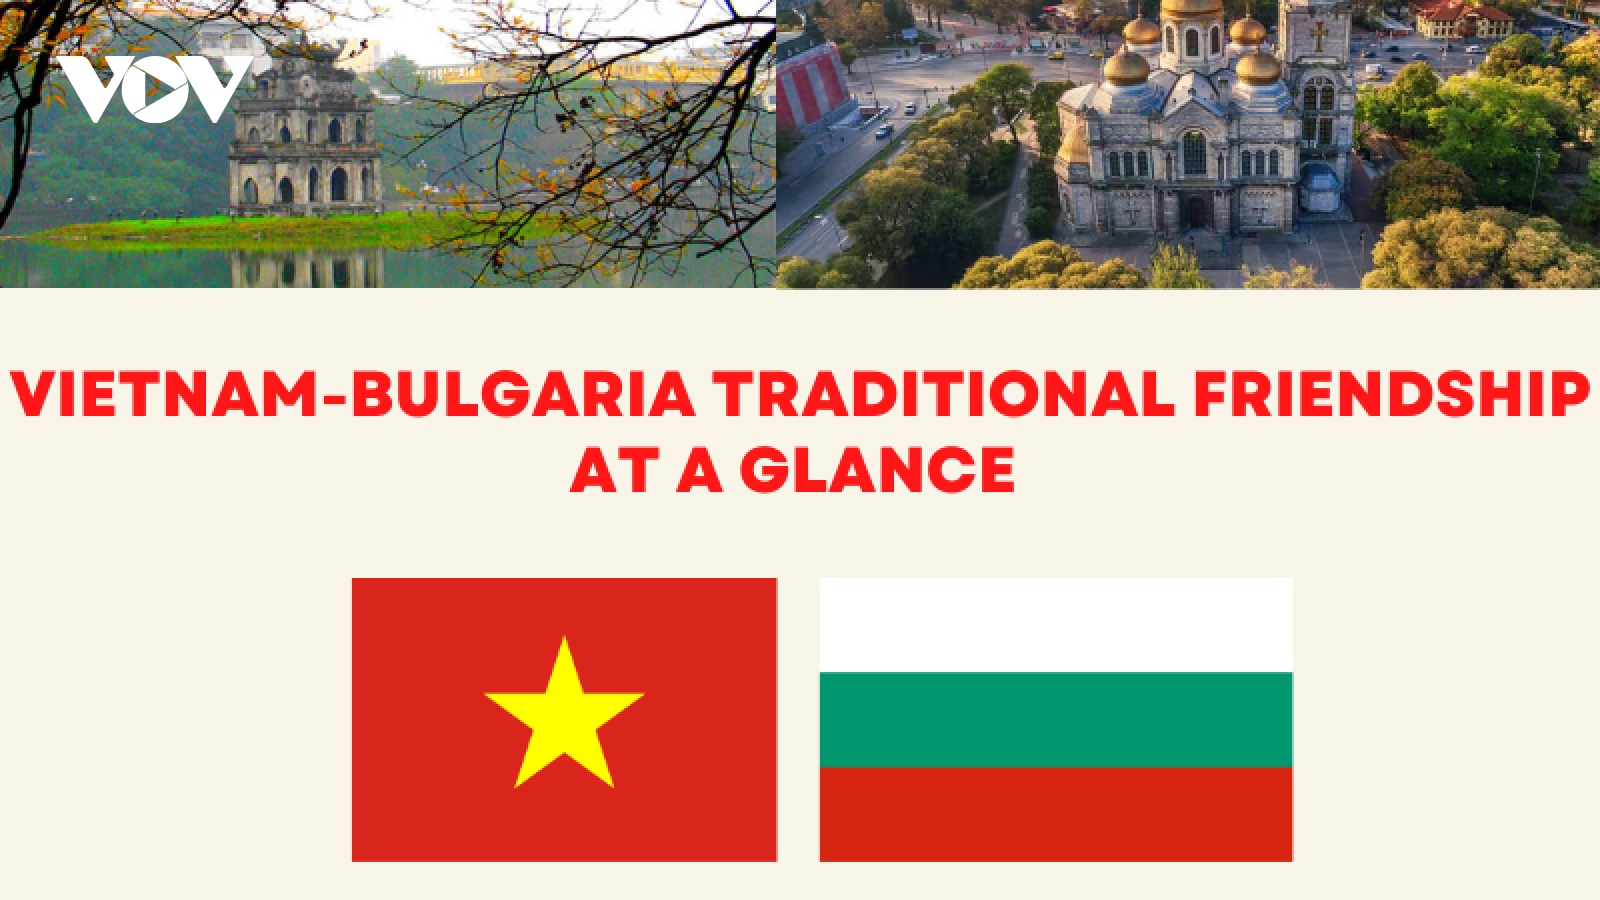 Overview of 74-year Vietnam-Bulgaria traditional friendship